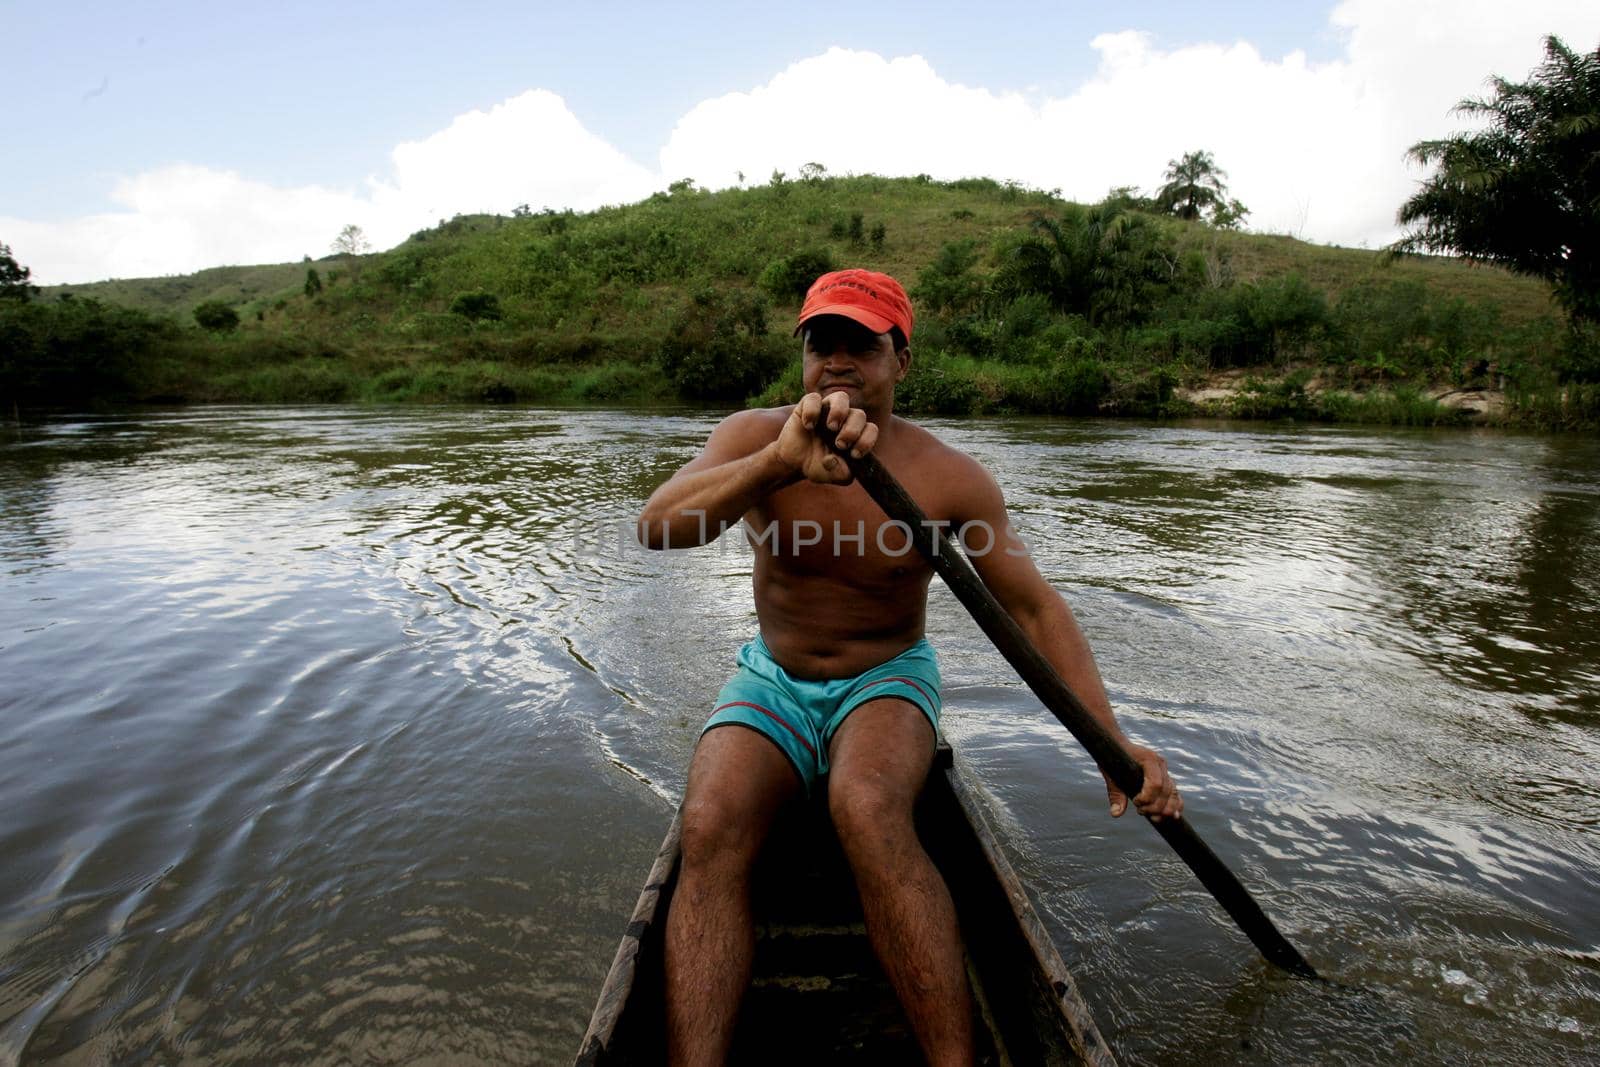 eunapolis, bahia / brazil - july 8, 2009: fisherman is seen in the waters of the Buranhem river in the city of Eunapolis, in southern Bahia.

